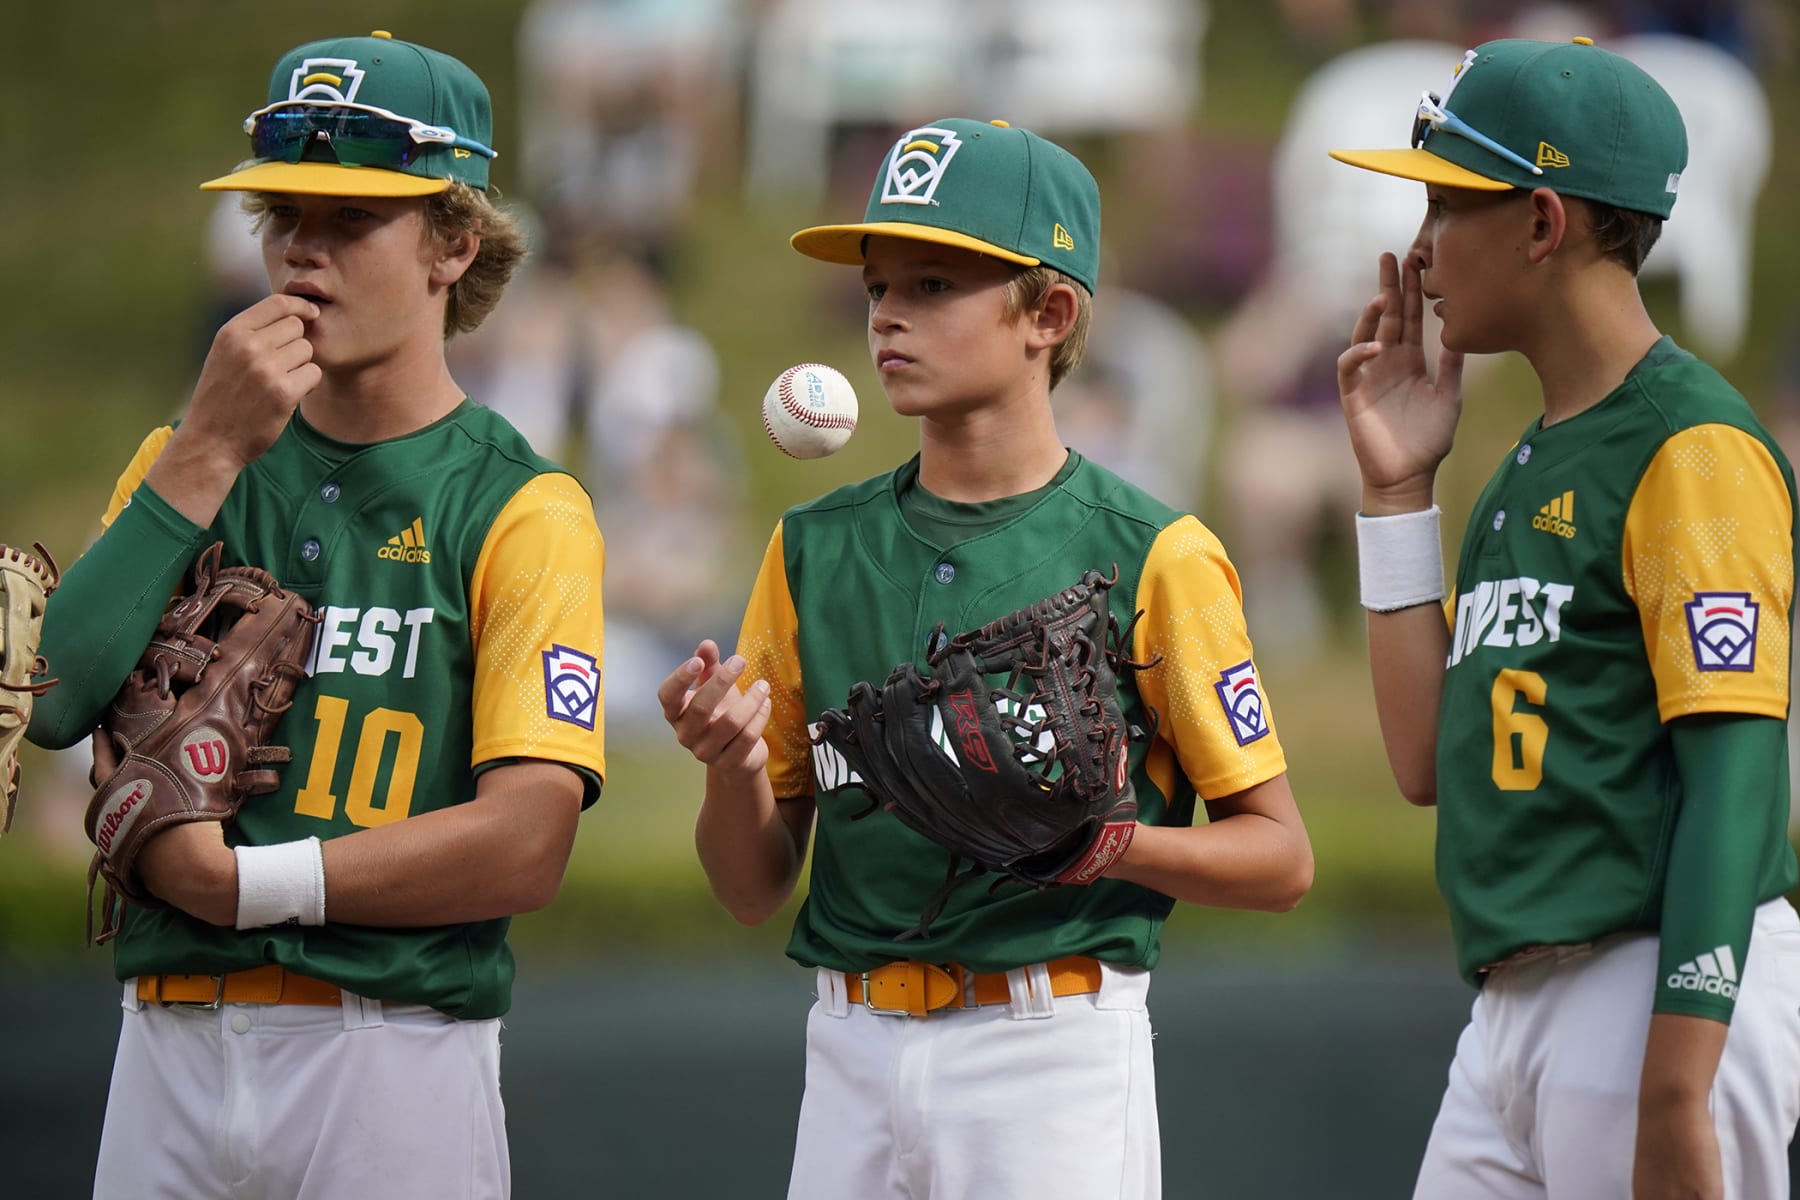 Little League World Series 2022 results: Fueled by defense, Curacao wins  LLWS international championship